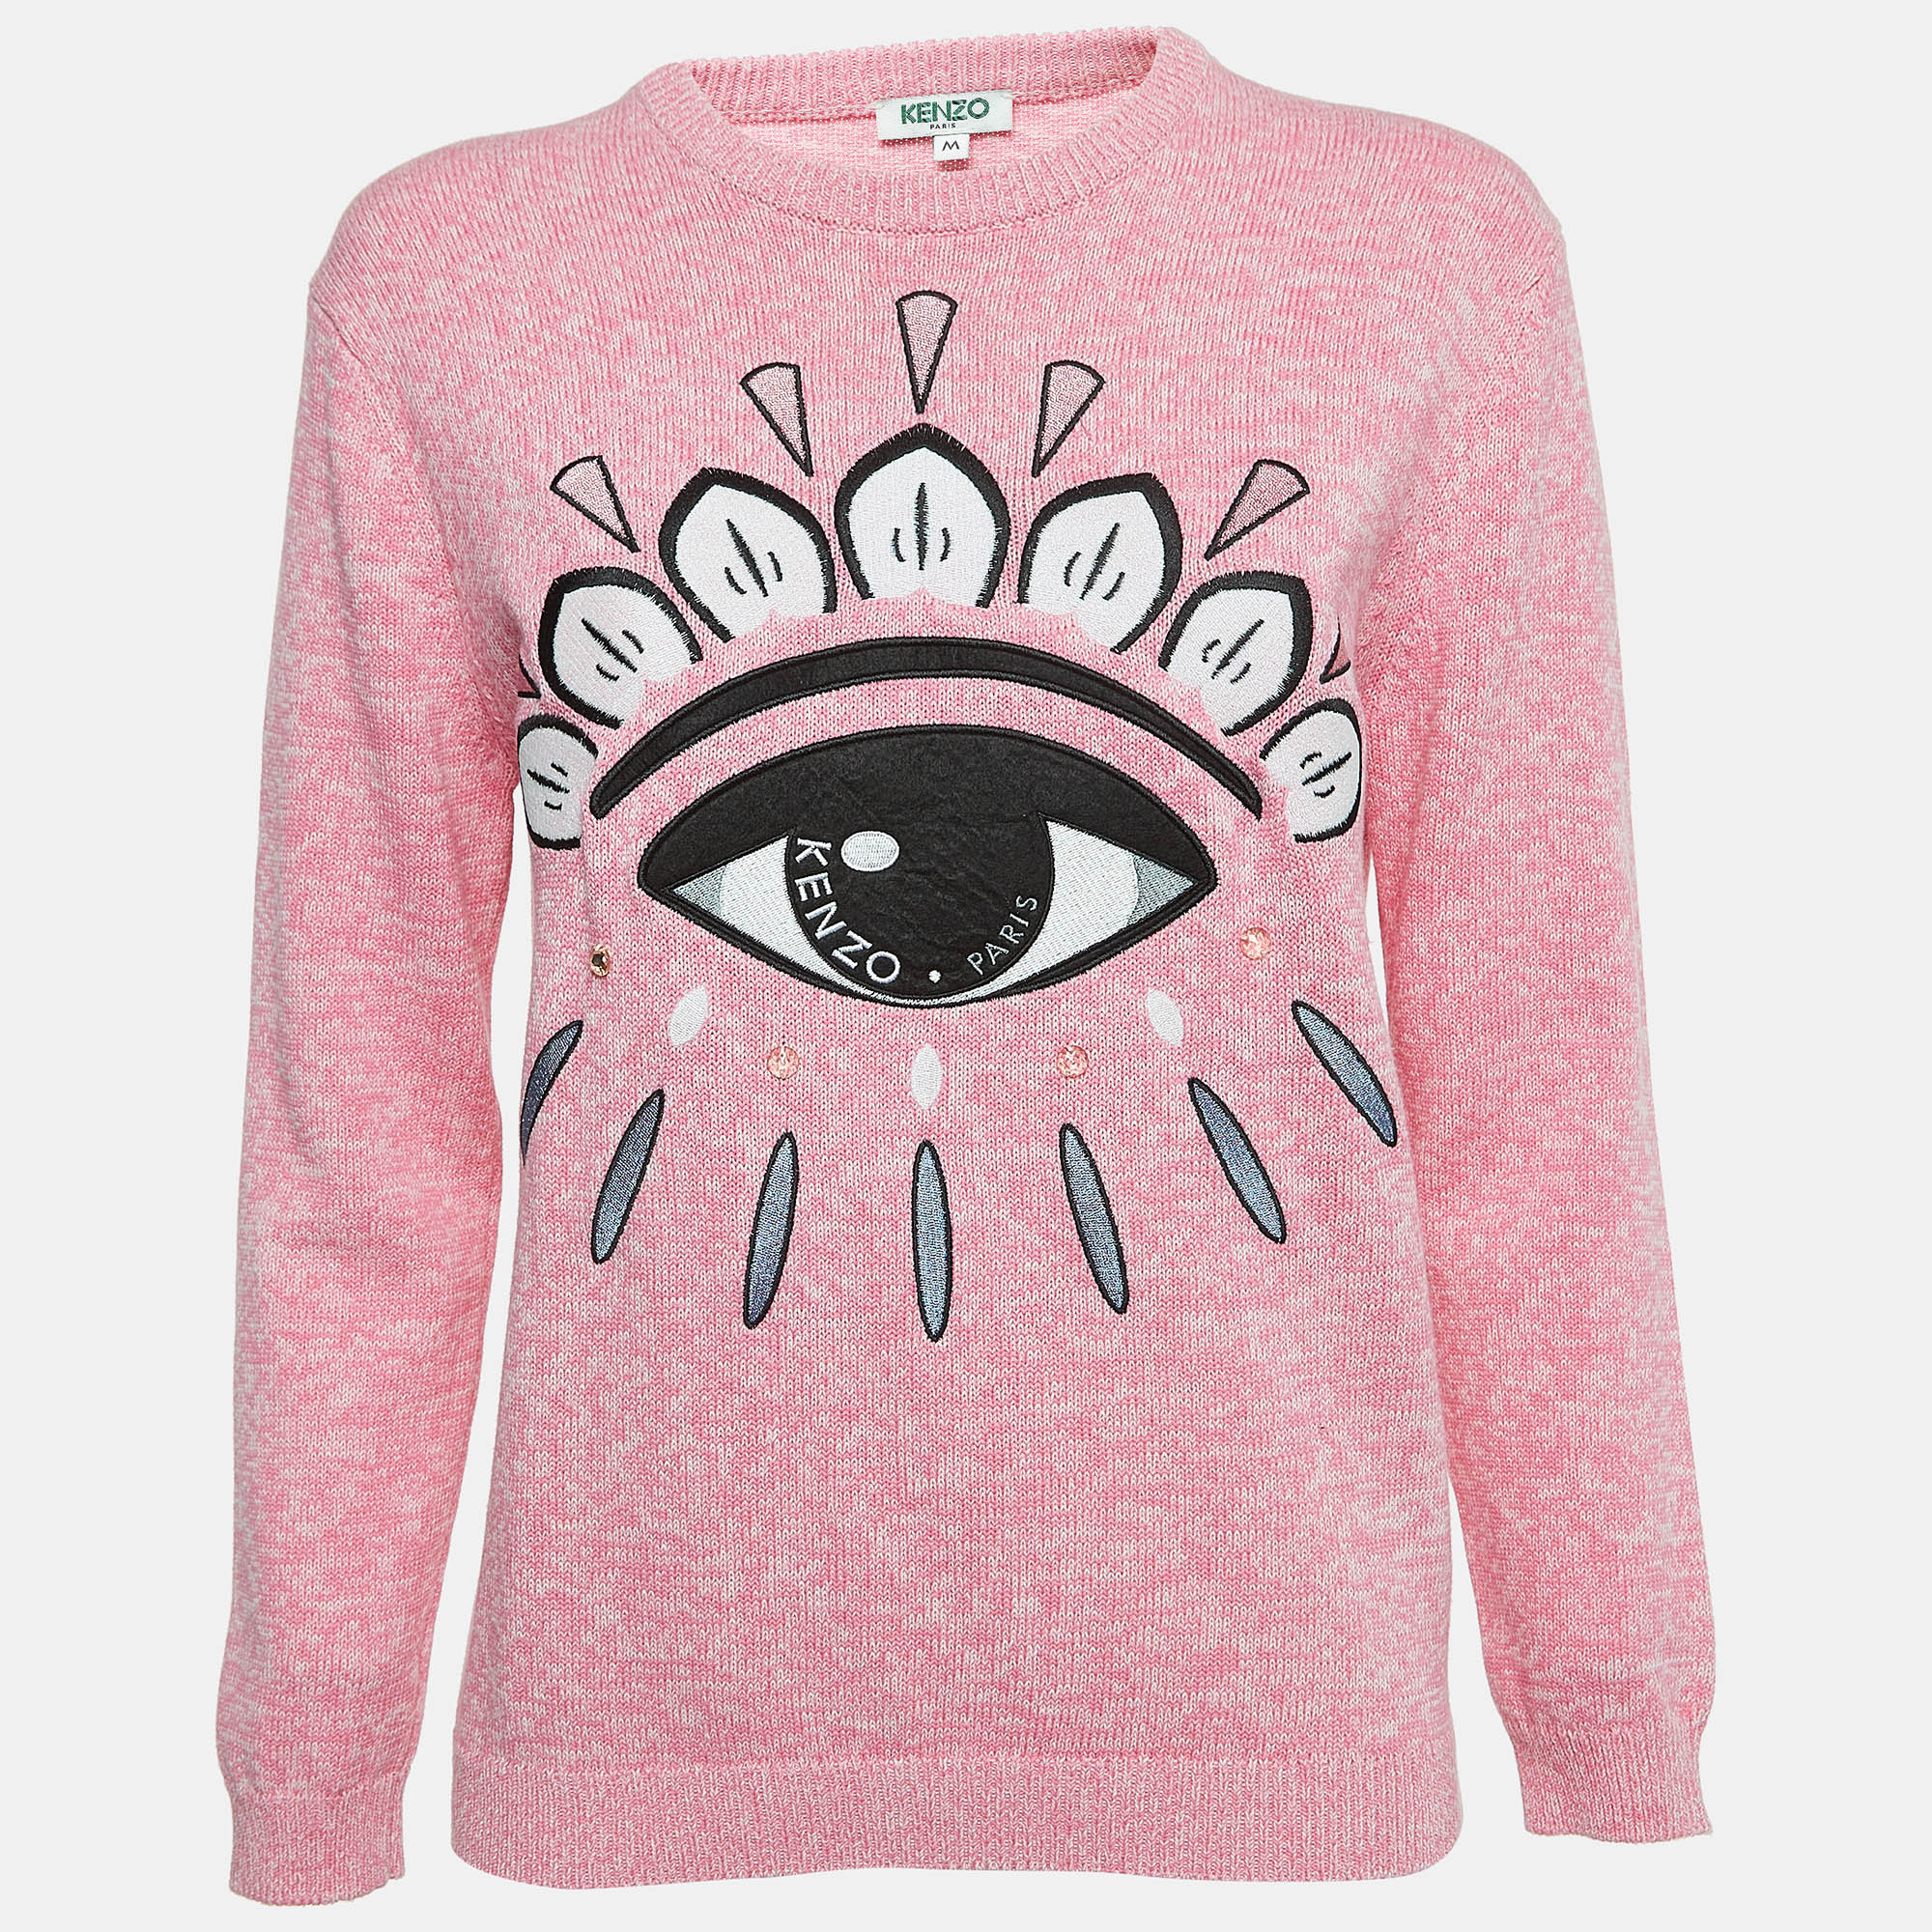 Kenzo Pink Knit Embroidered Sweater M